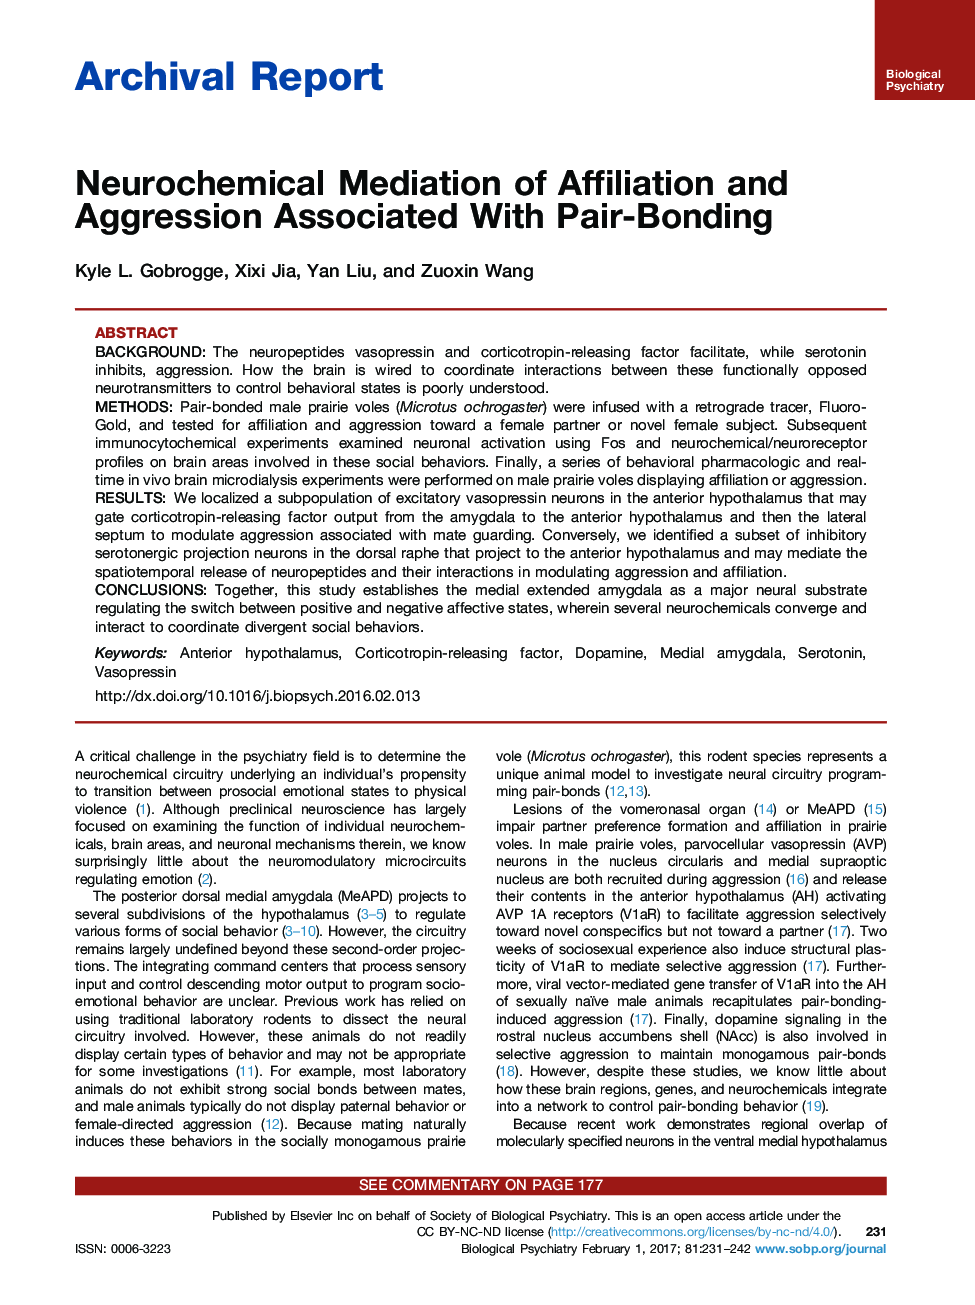 Archival ReportNeurochemical Mediation of Affiliation and Aggression Associated With Pair-Bonding